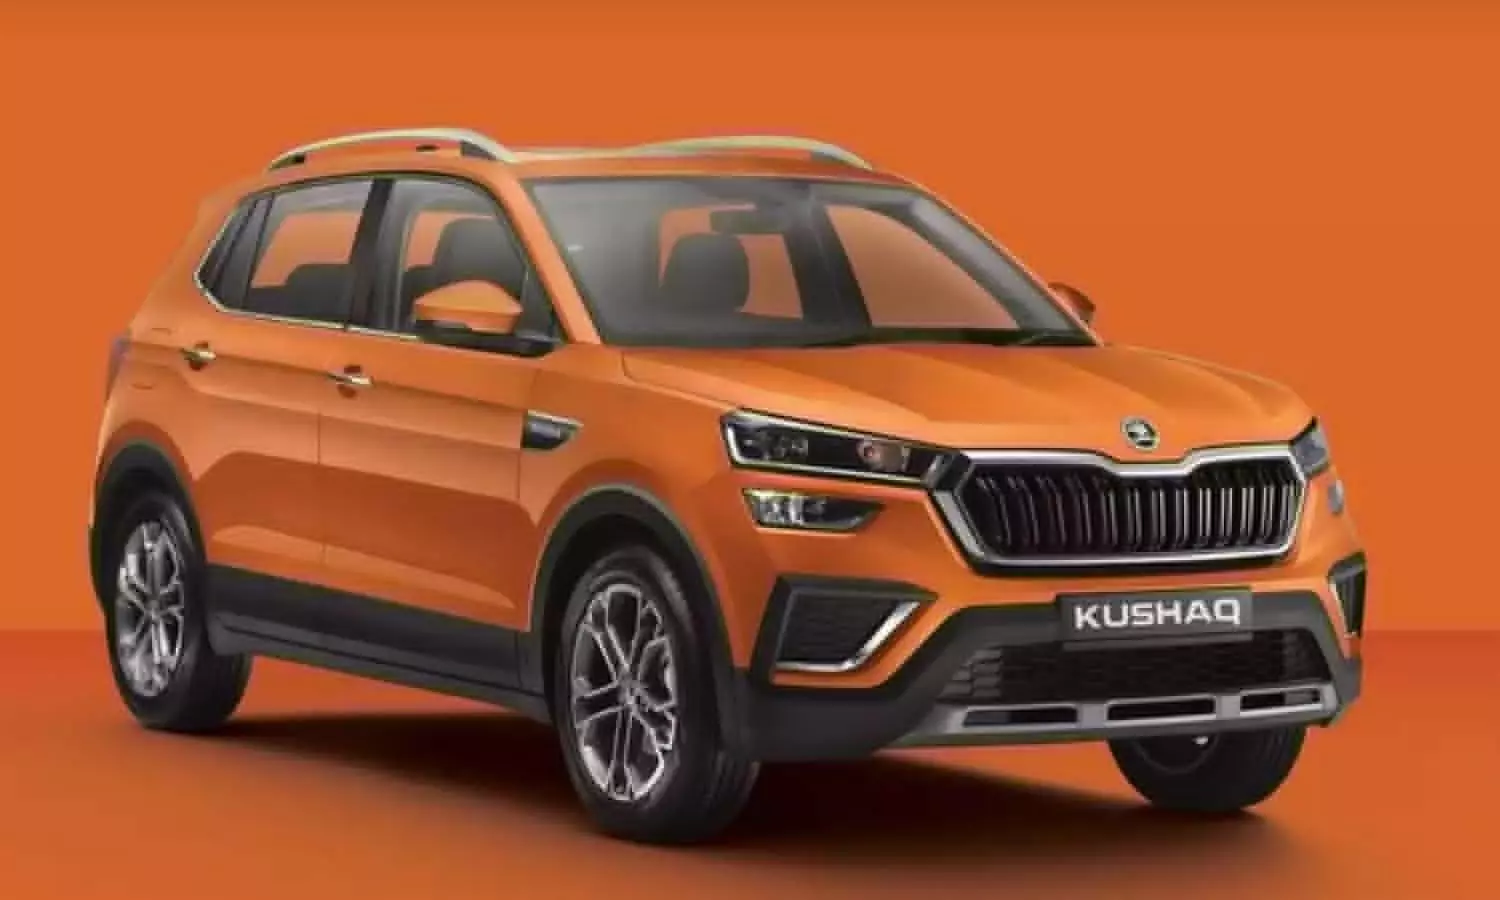 Skoda KUSHAQ is one such SUV that suits Indian culture, see features